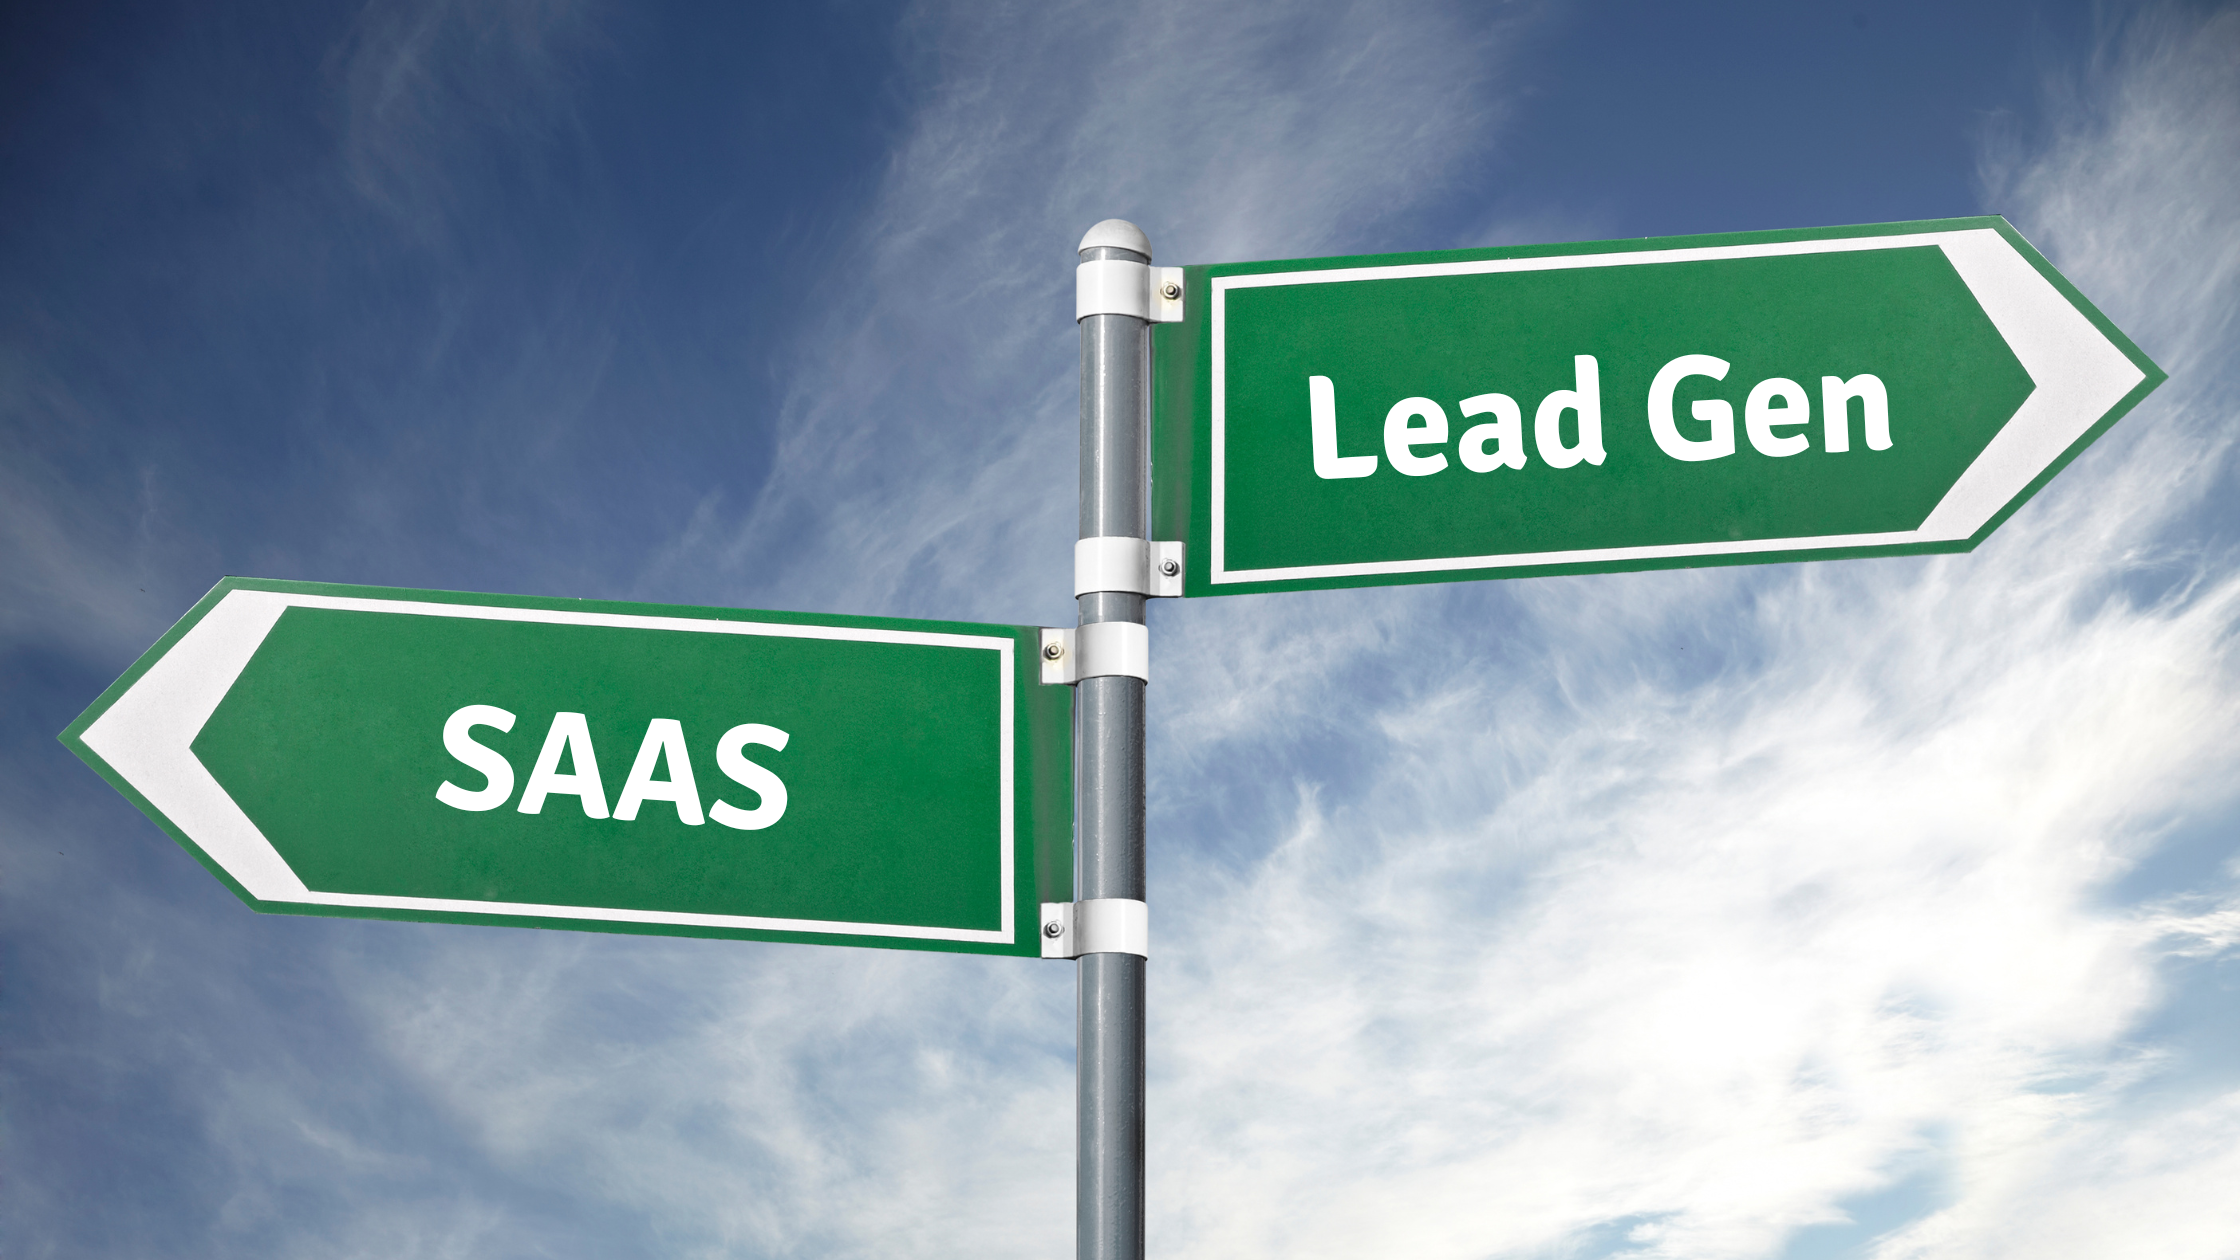 29 Actionable Lead Generation Strategies for SaaS Companies